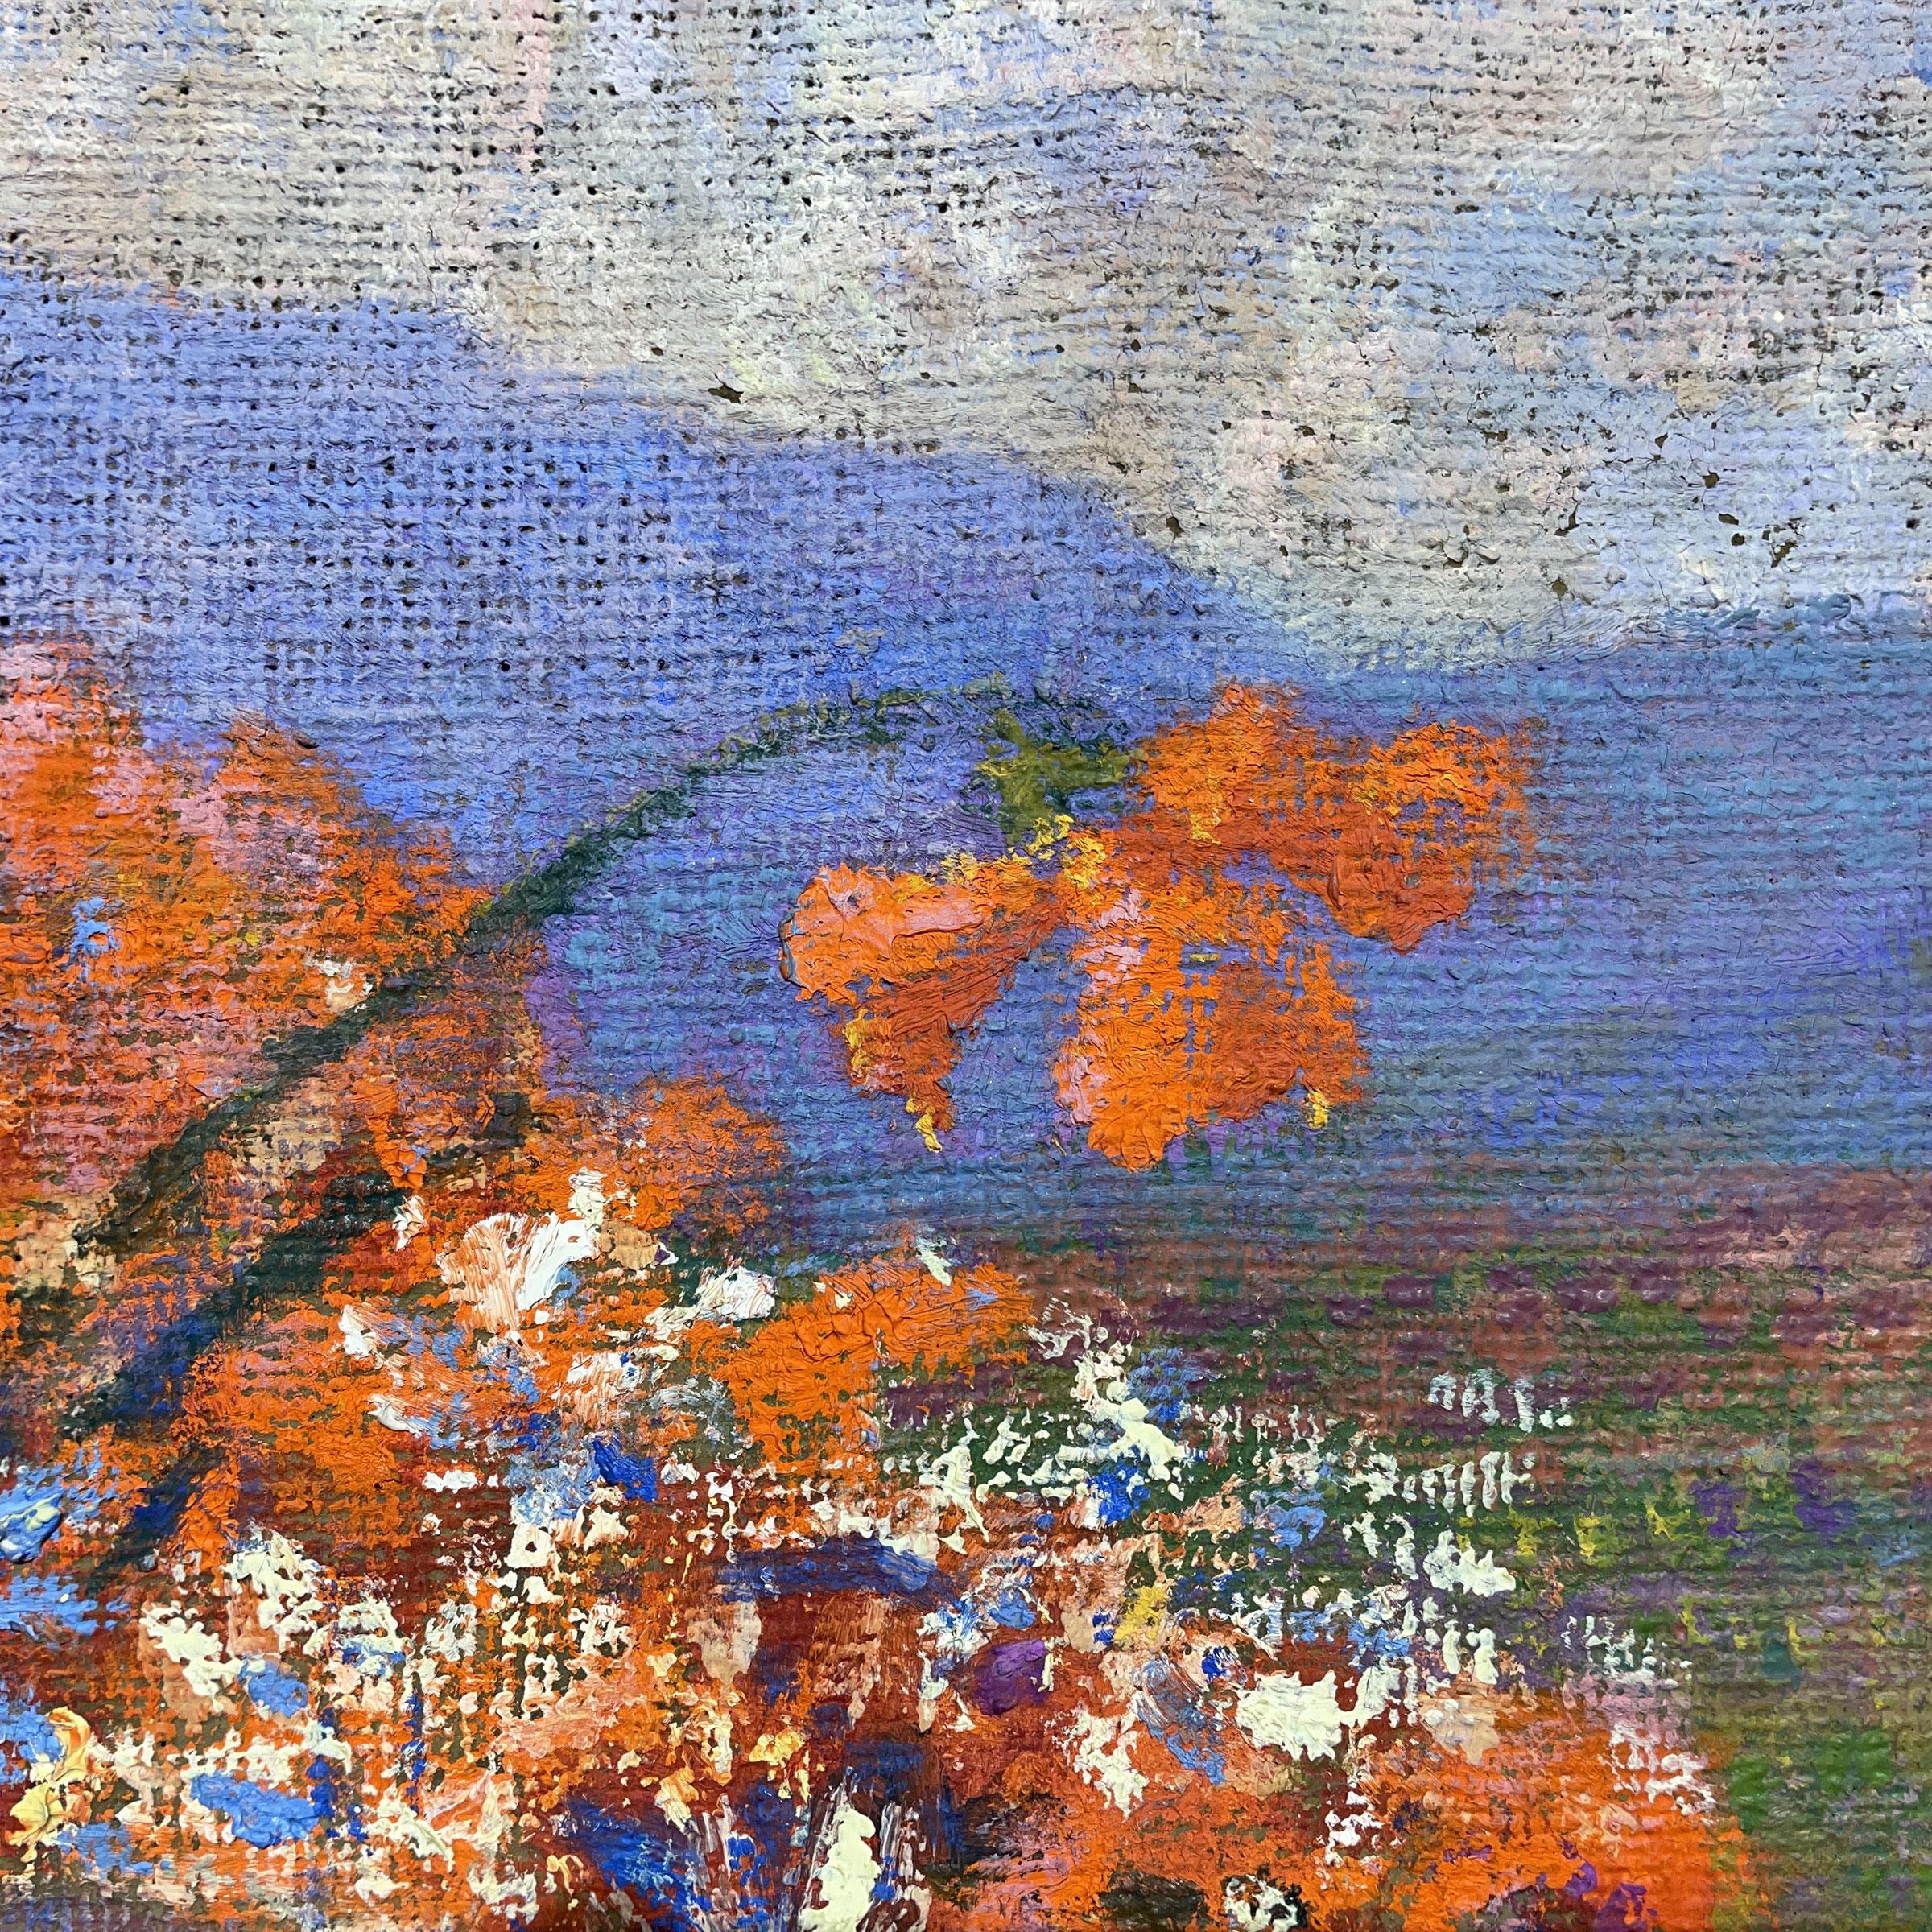 Oiled Mountain Flowers and Children Painting, Oil on Canvas, Salvino Tofanari, 1930